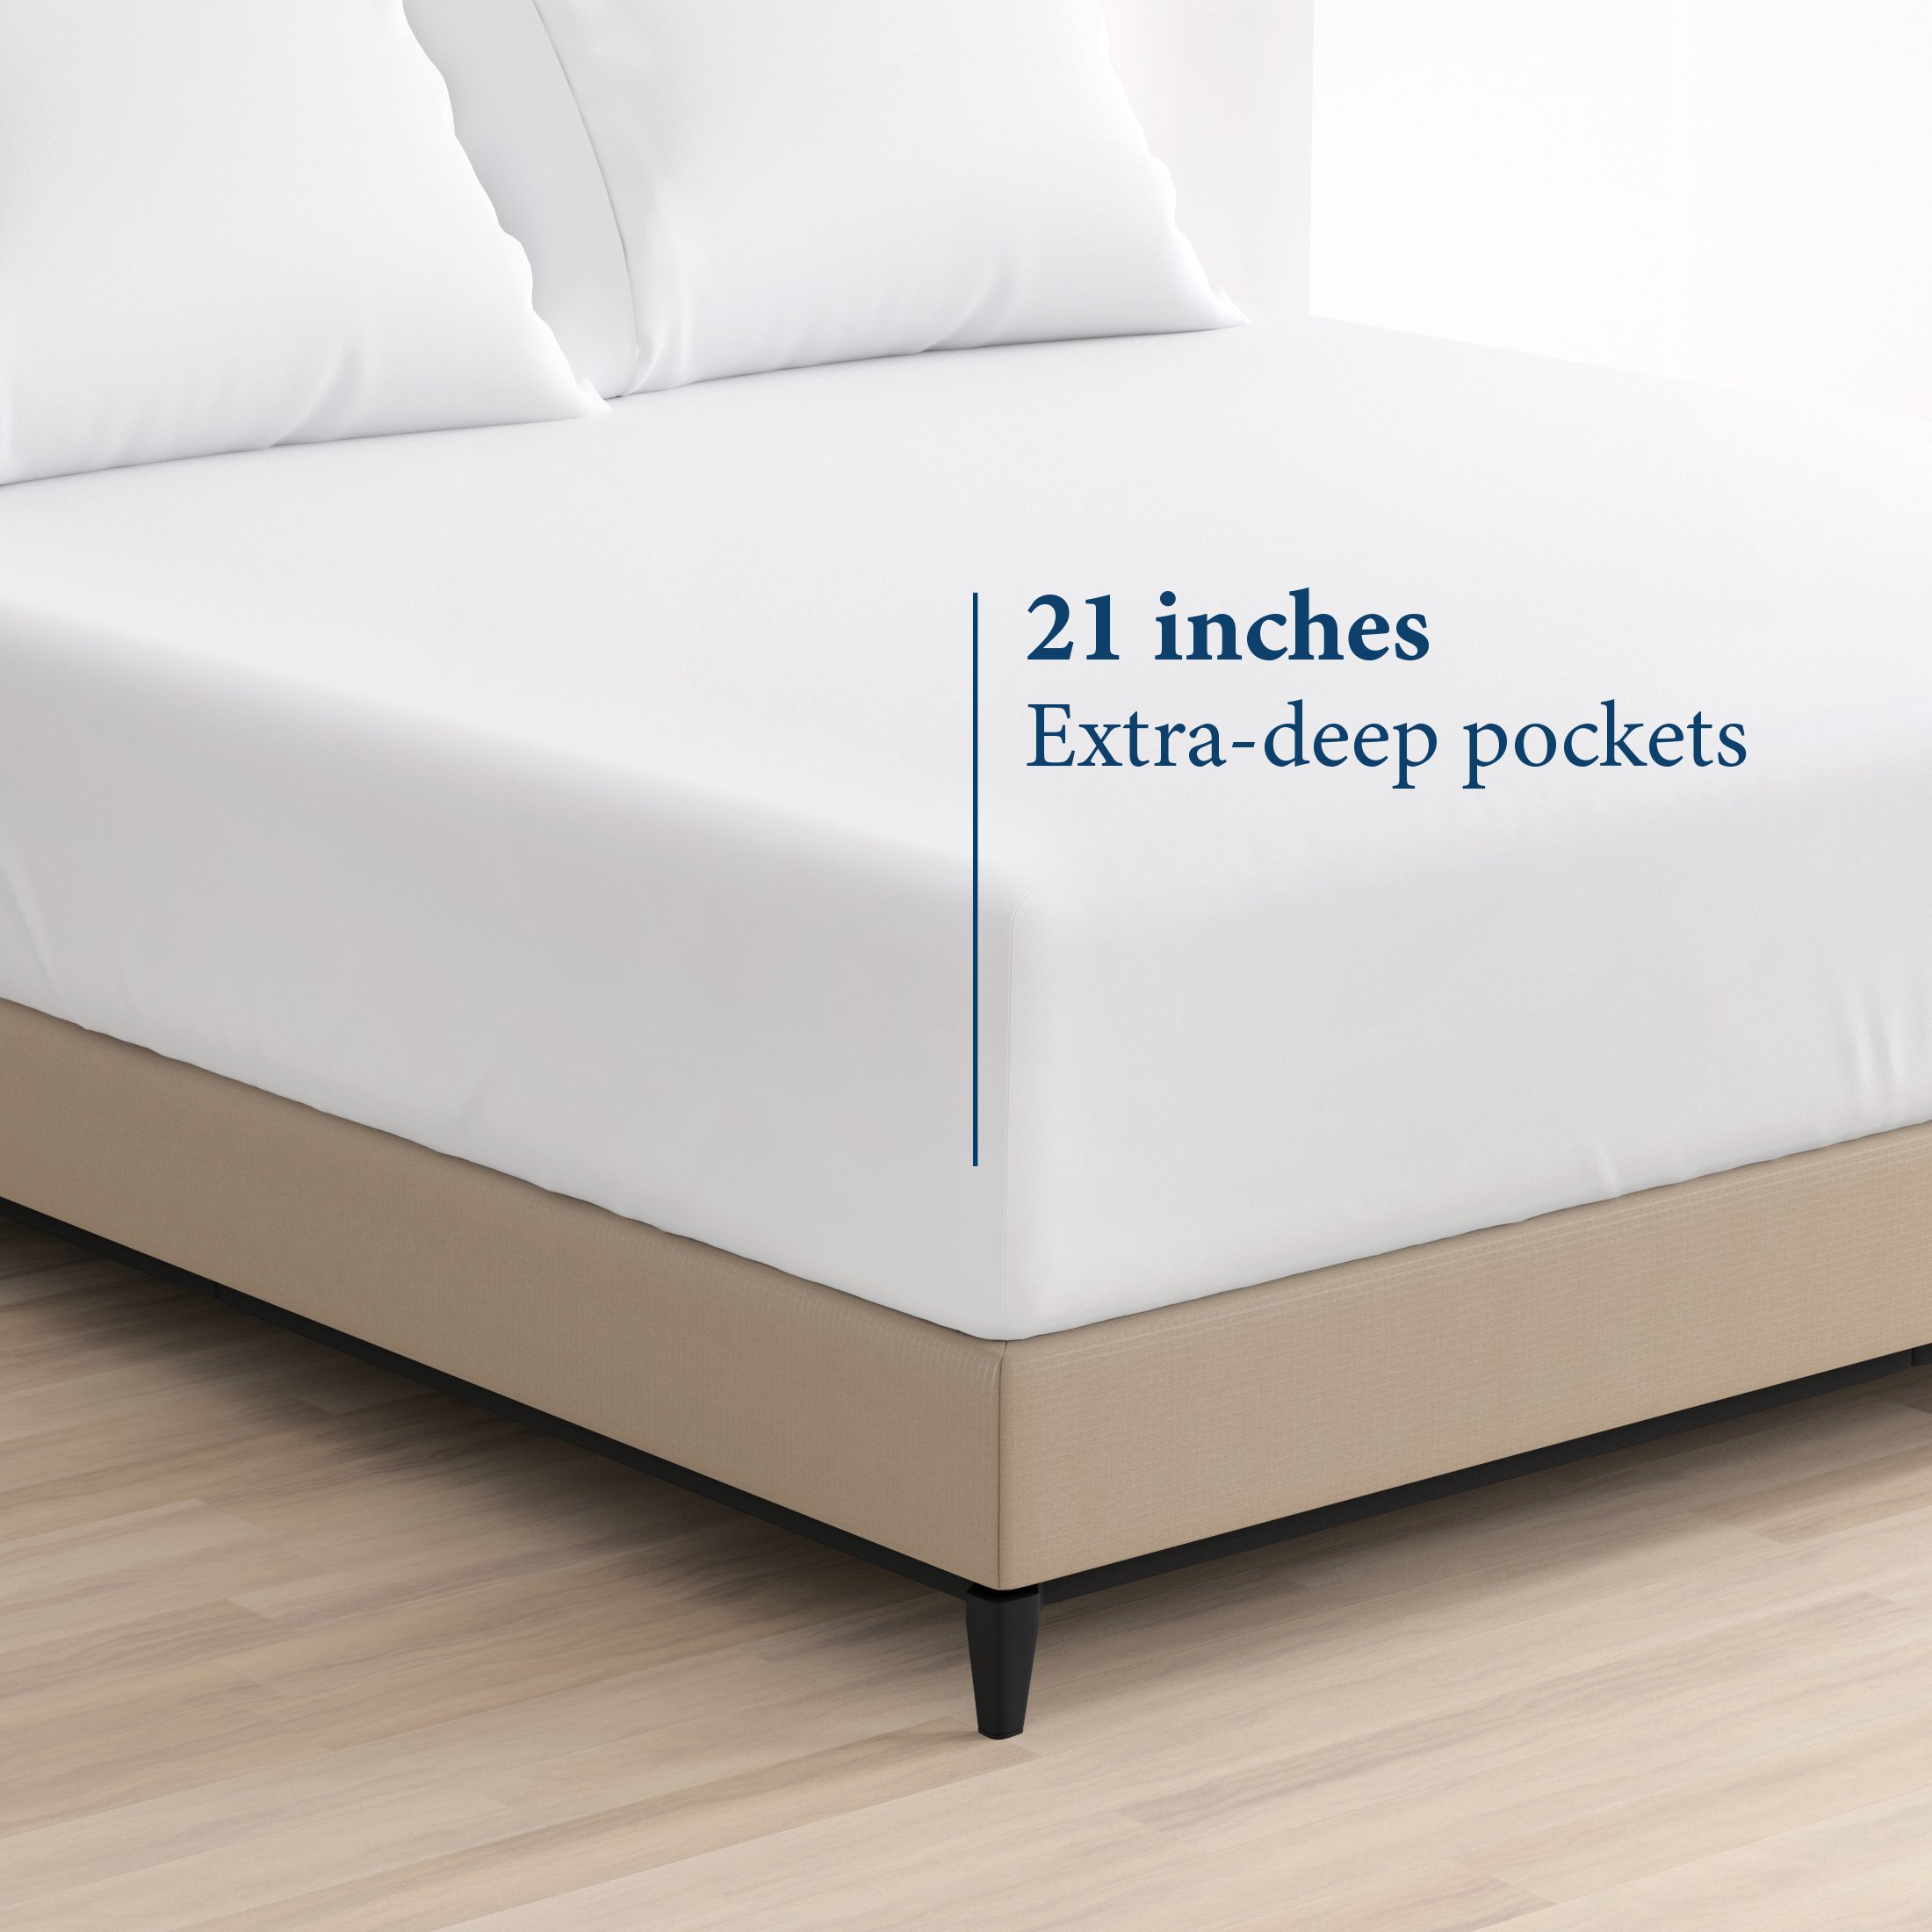  Full Fitted Sheets - Deep Pocket Mattress Cover up to